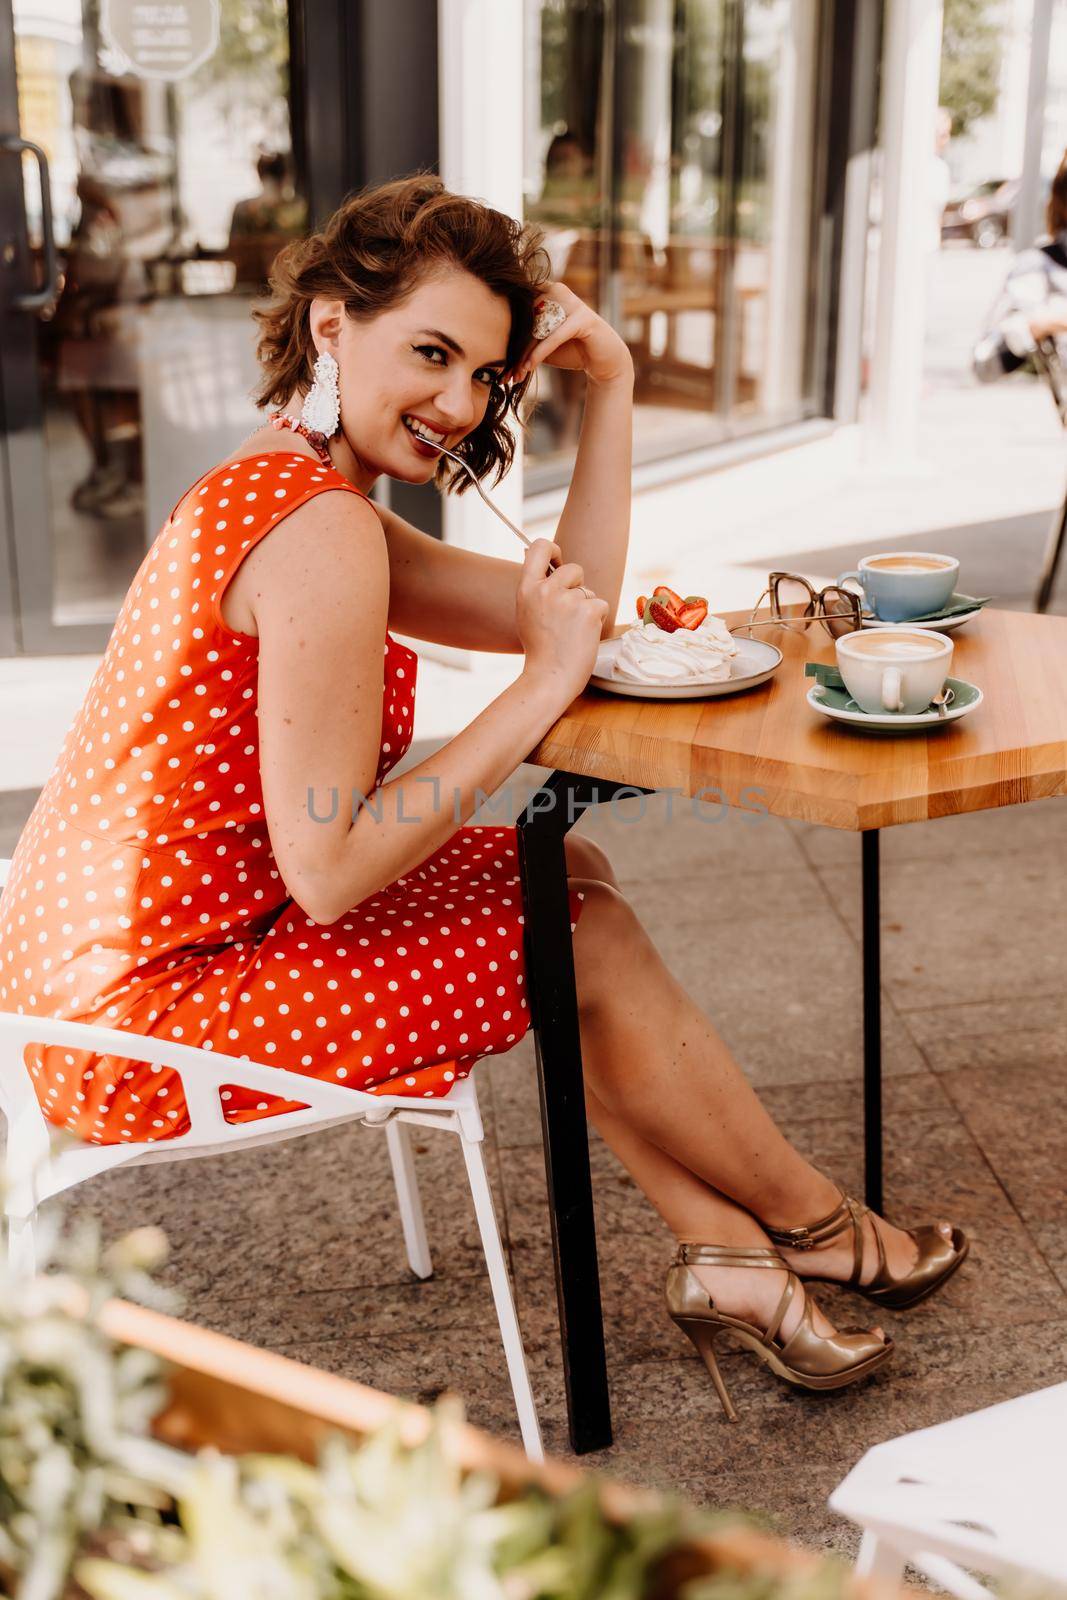 Charming woman in a restaurant, cafe on the street. She sits at the table and eats a cake with a fork. Dressed in a red sundress with white polka dots. by Matiunina